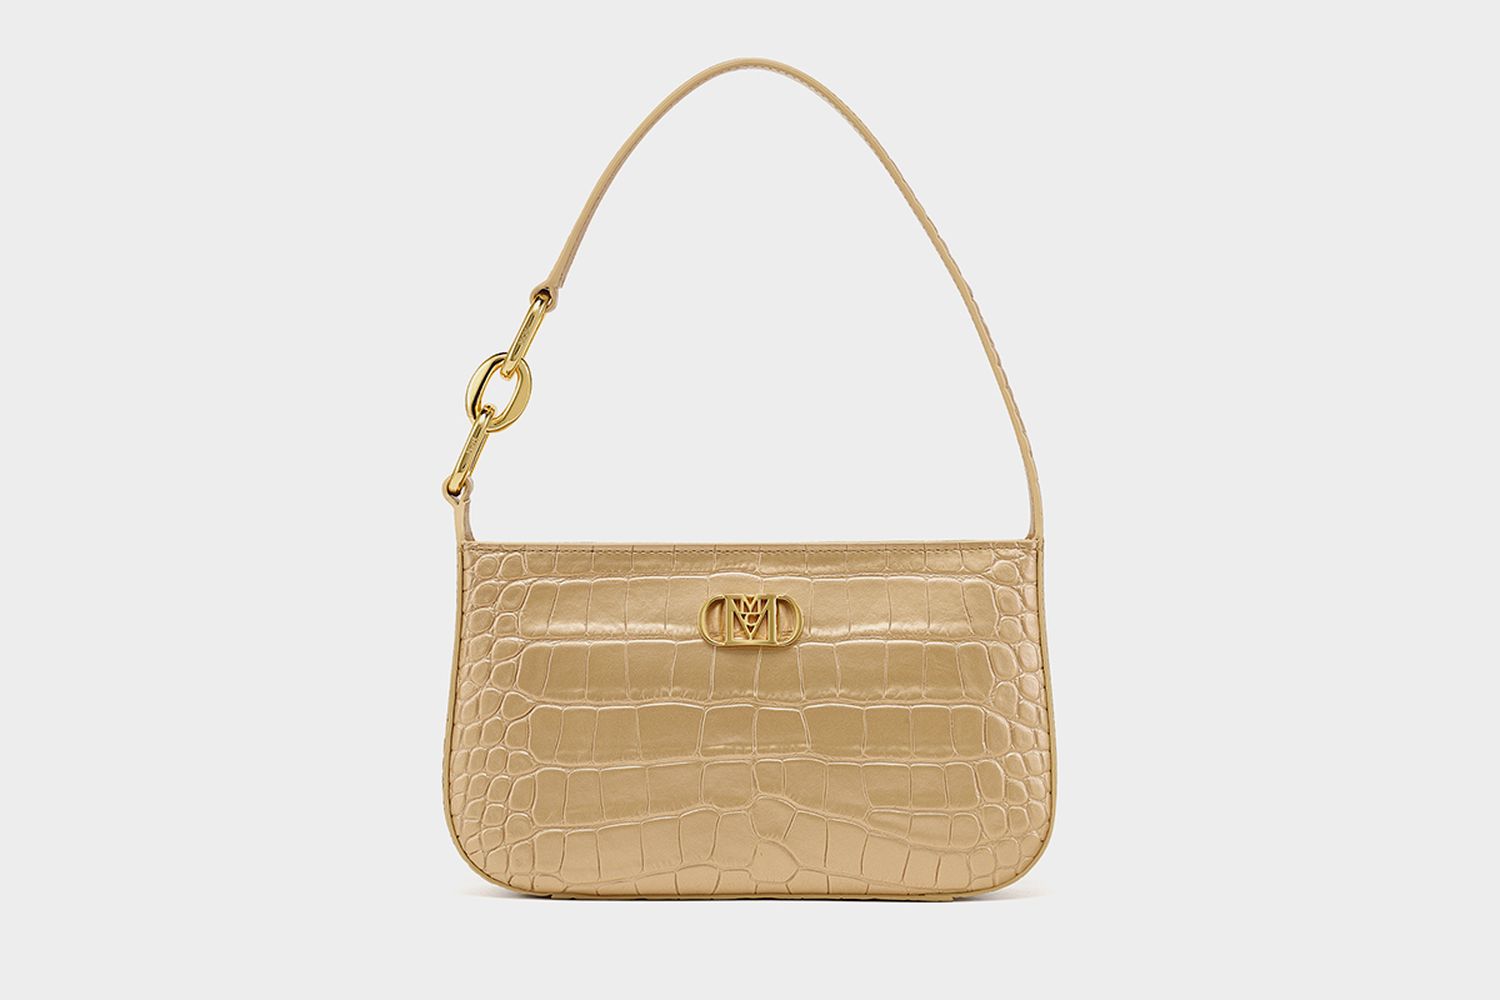 Mode Travia Shoulder Bag in Gold Croco Leather